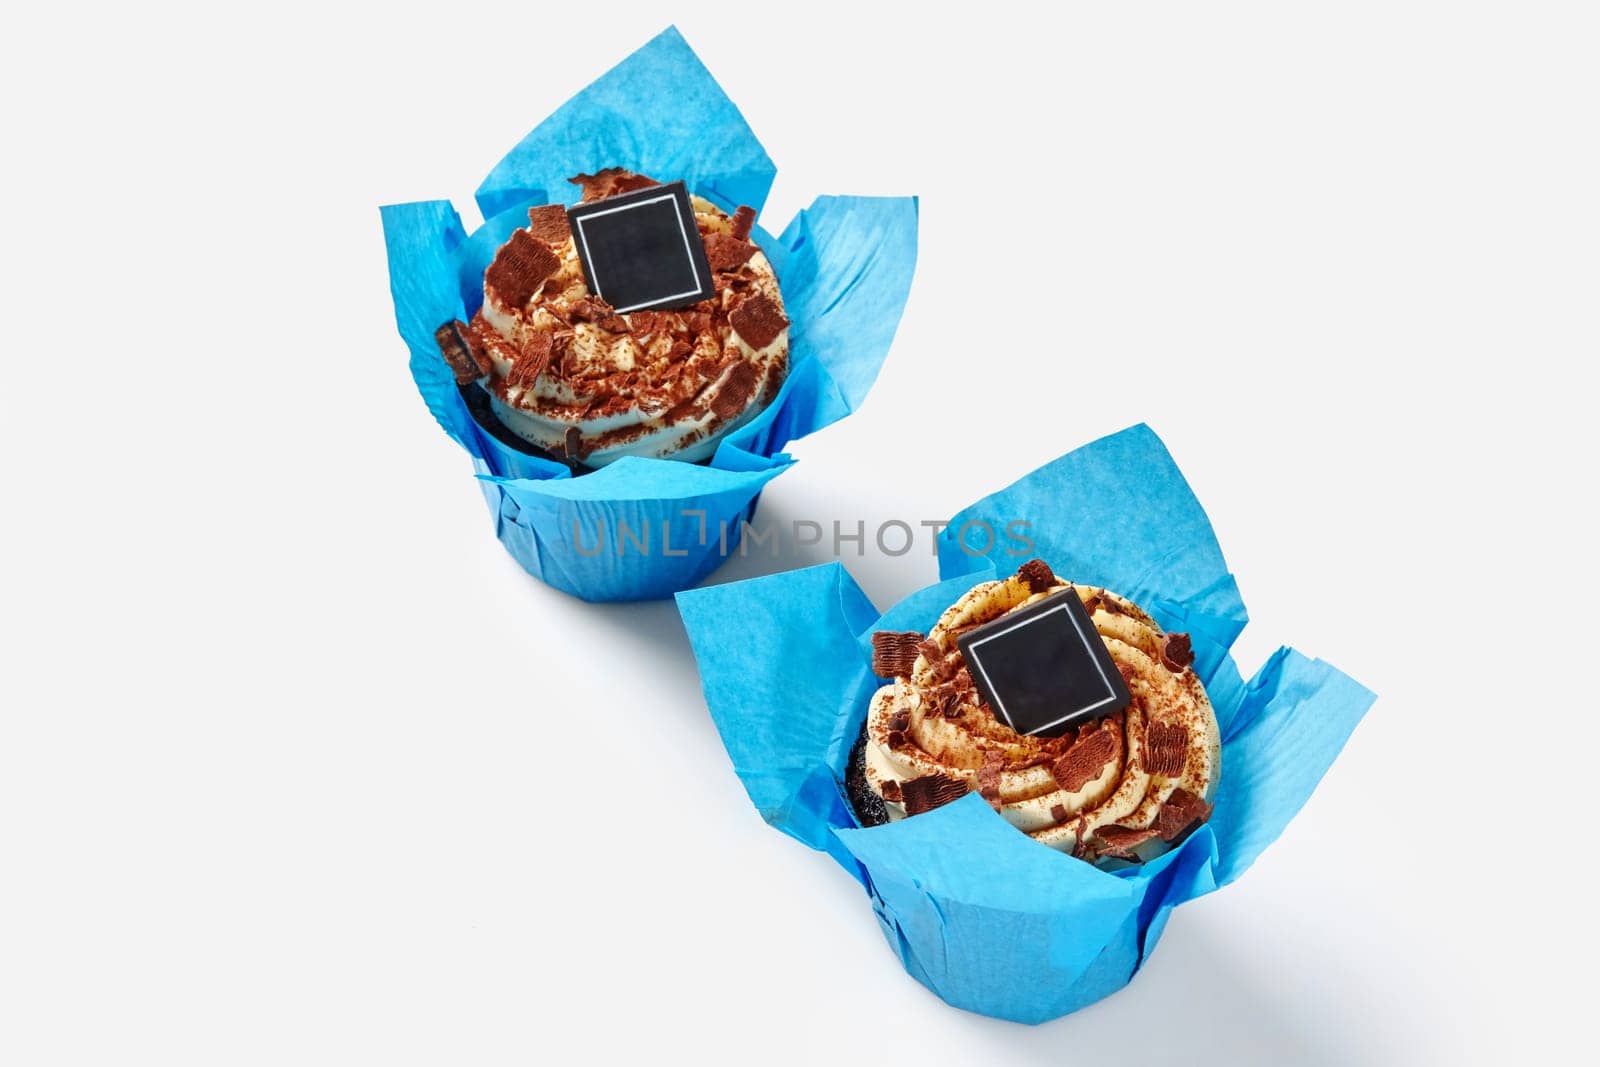 Chocolate cupcakes with whipped cream in blue paper wrappers by nazarovsergey